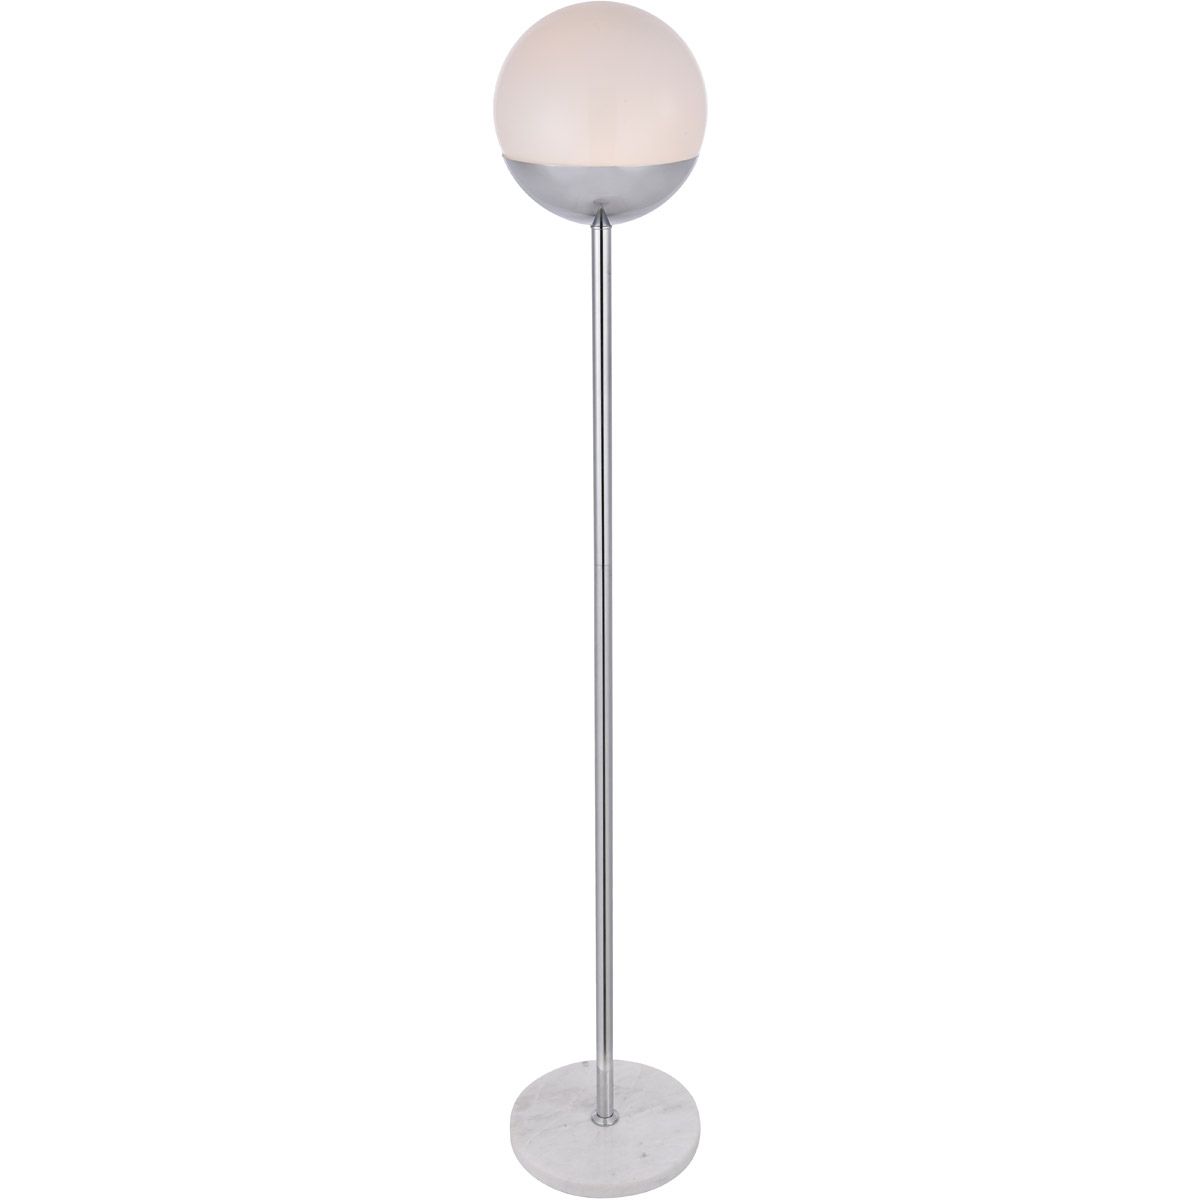 Chrome Finish Metal Standing Lamps In Preferred Floor Lamps 1 Light Fixtures With Chrome Finish Metal/glass/marble Material  E26 Bulb 11" 40 Watts – Walmart (View 14 of 15)